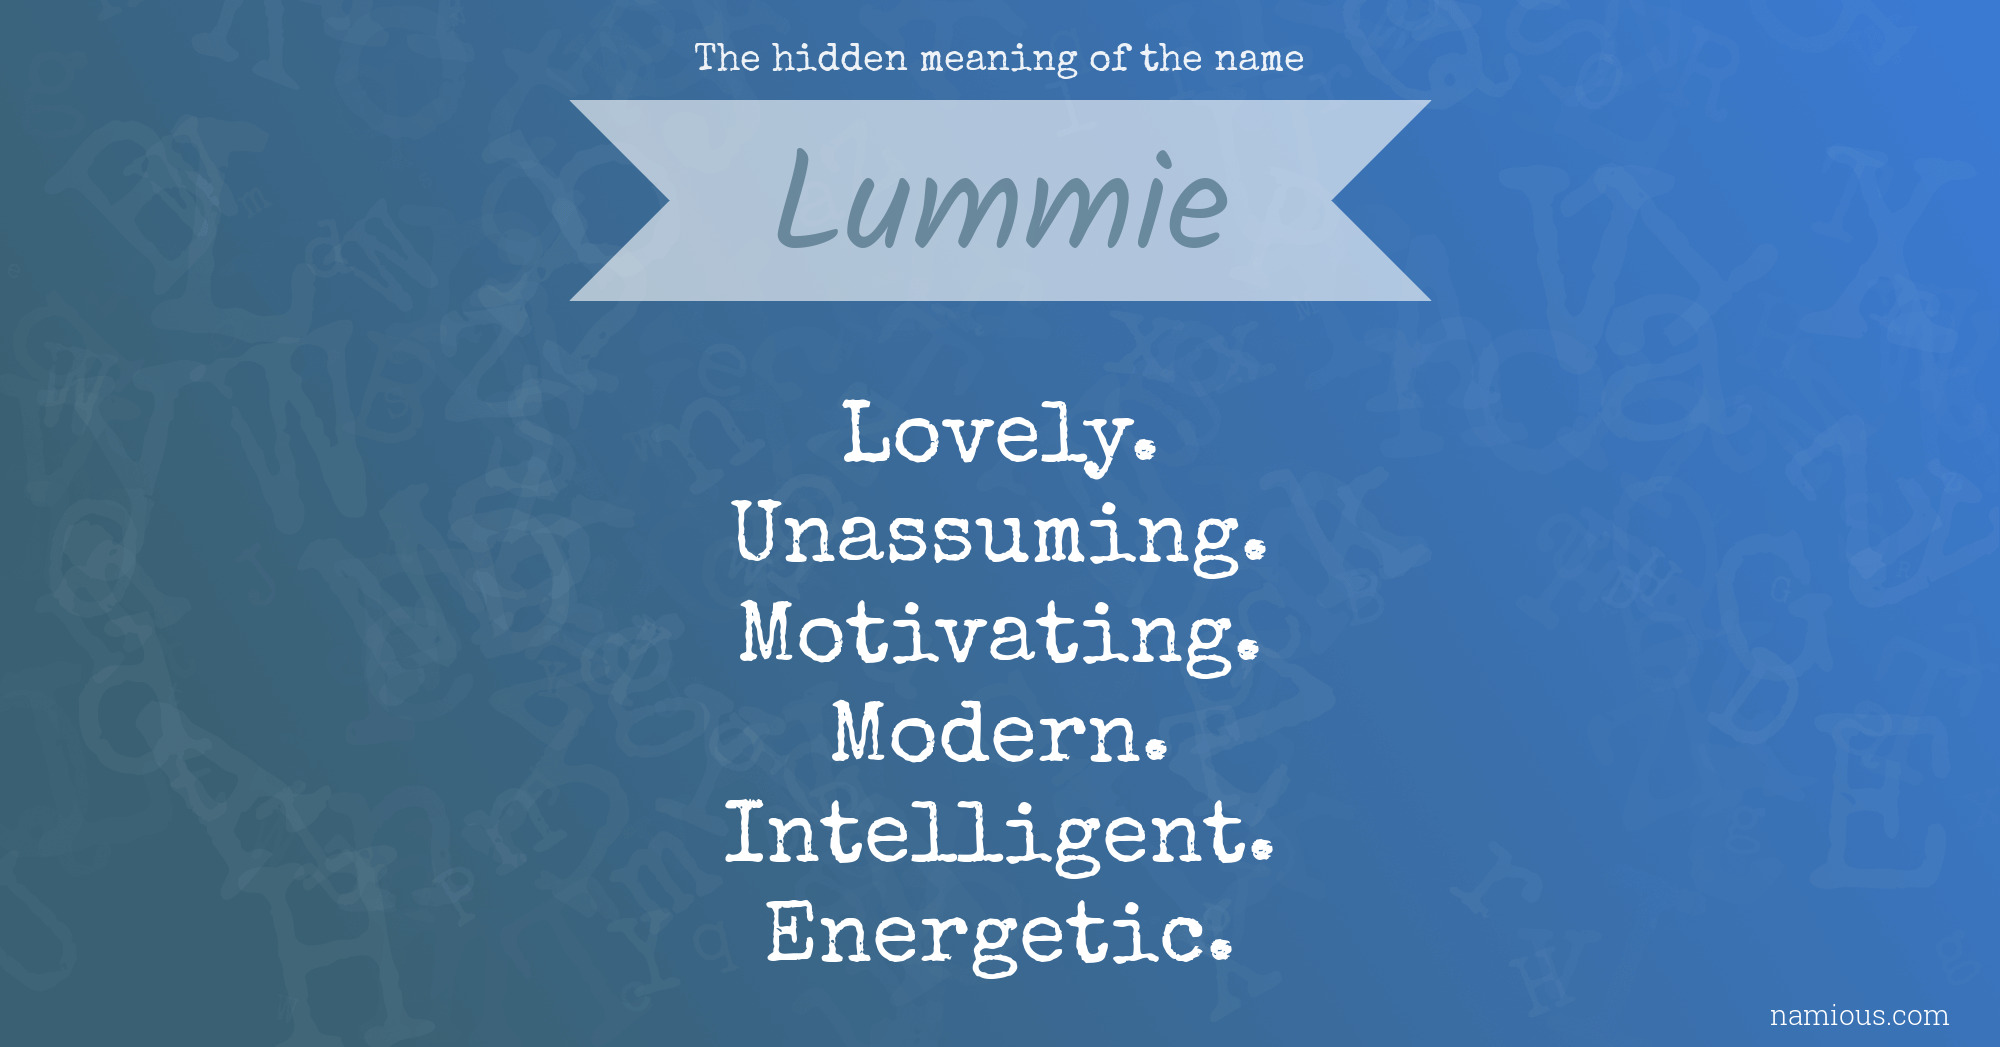 The hidden meaning of the name Lummie